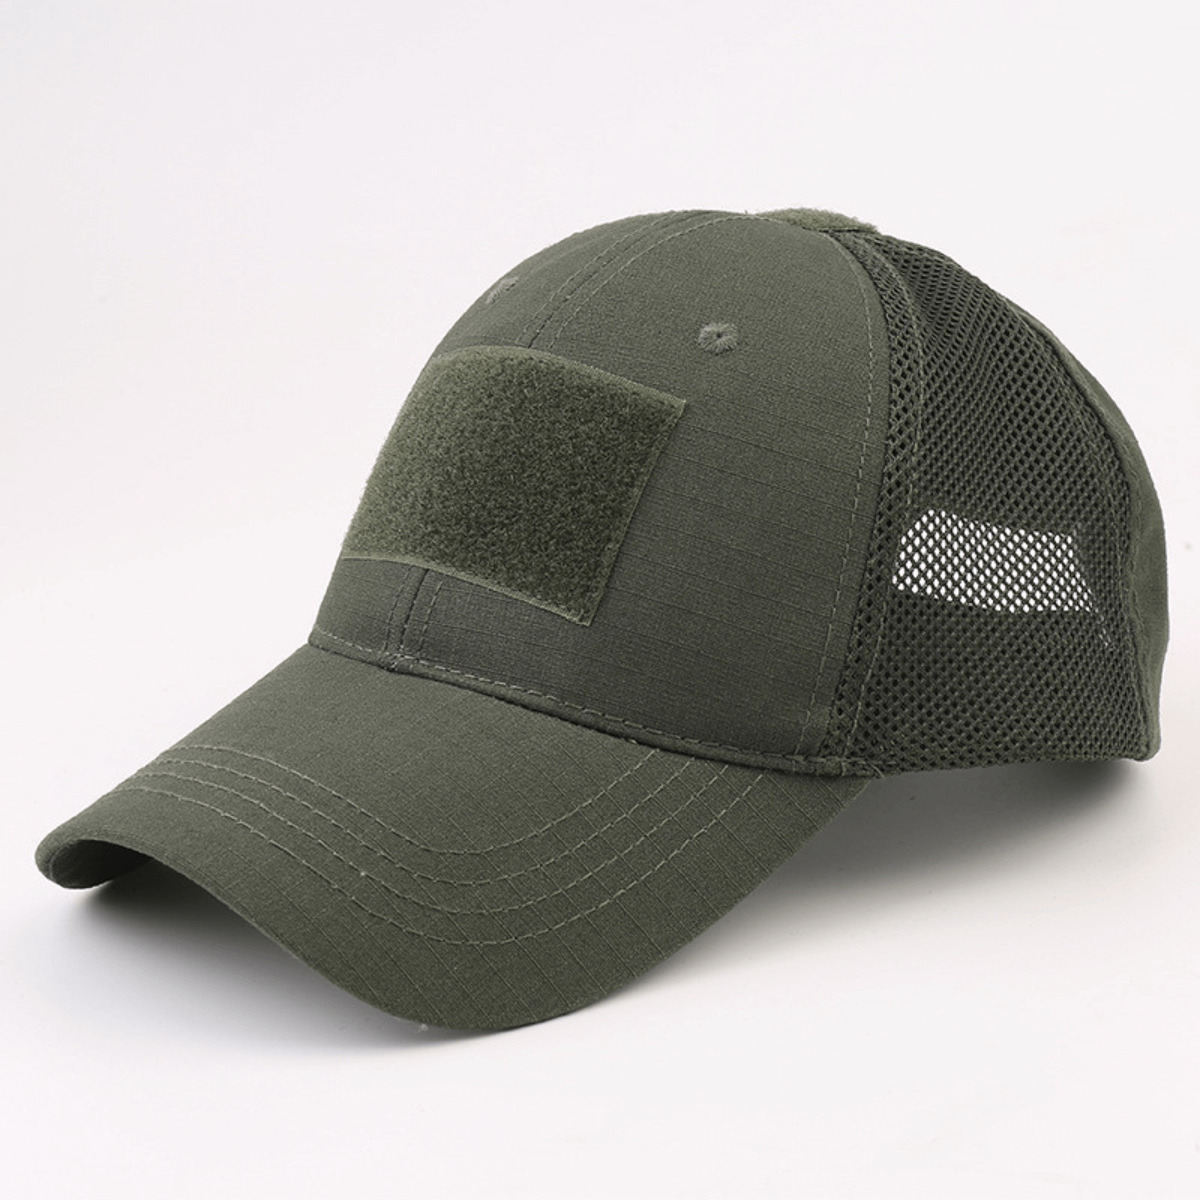 Tactical-Style Patch Hat With Adjustable Strap - Green